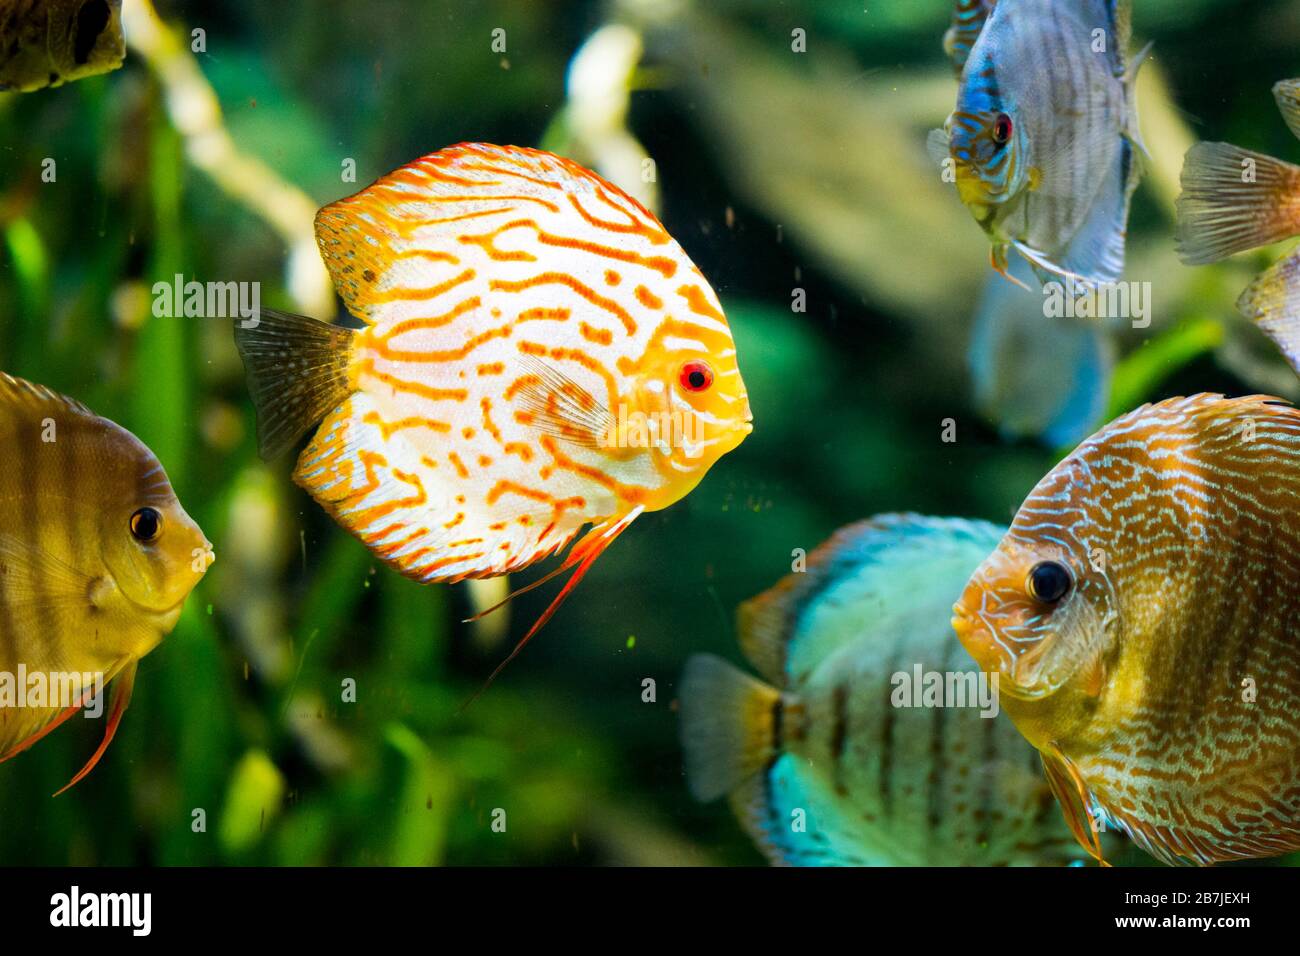 Discus Fish In Aquarium Tropical Fish Symphysodon Discus From Amazon River Blue Diamond Snakeskin Red Turquoise And More Stock Photo Alamy